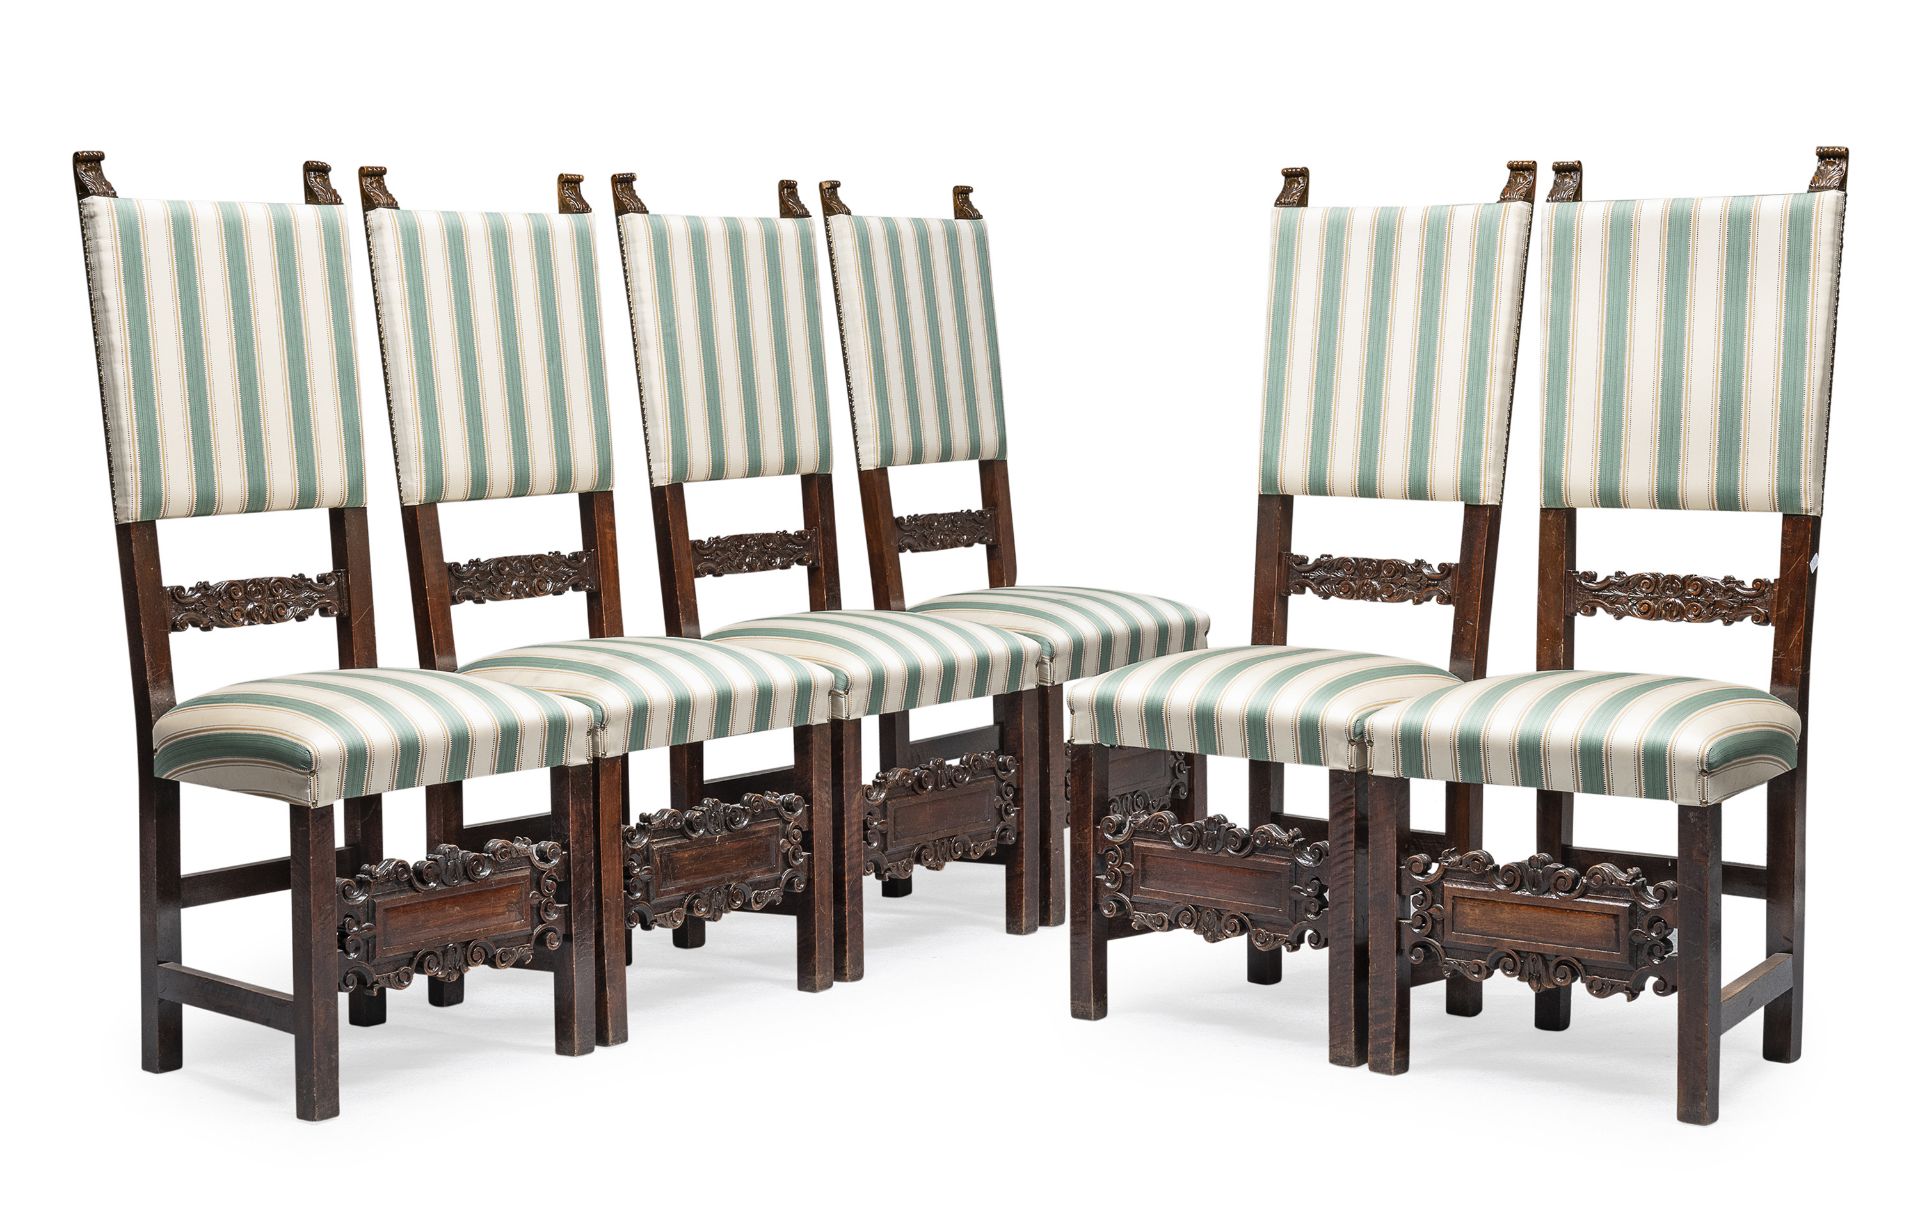 SIX CHAIRS IN WALNUT RENAISSANCE STYLE